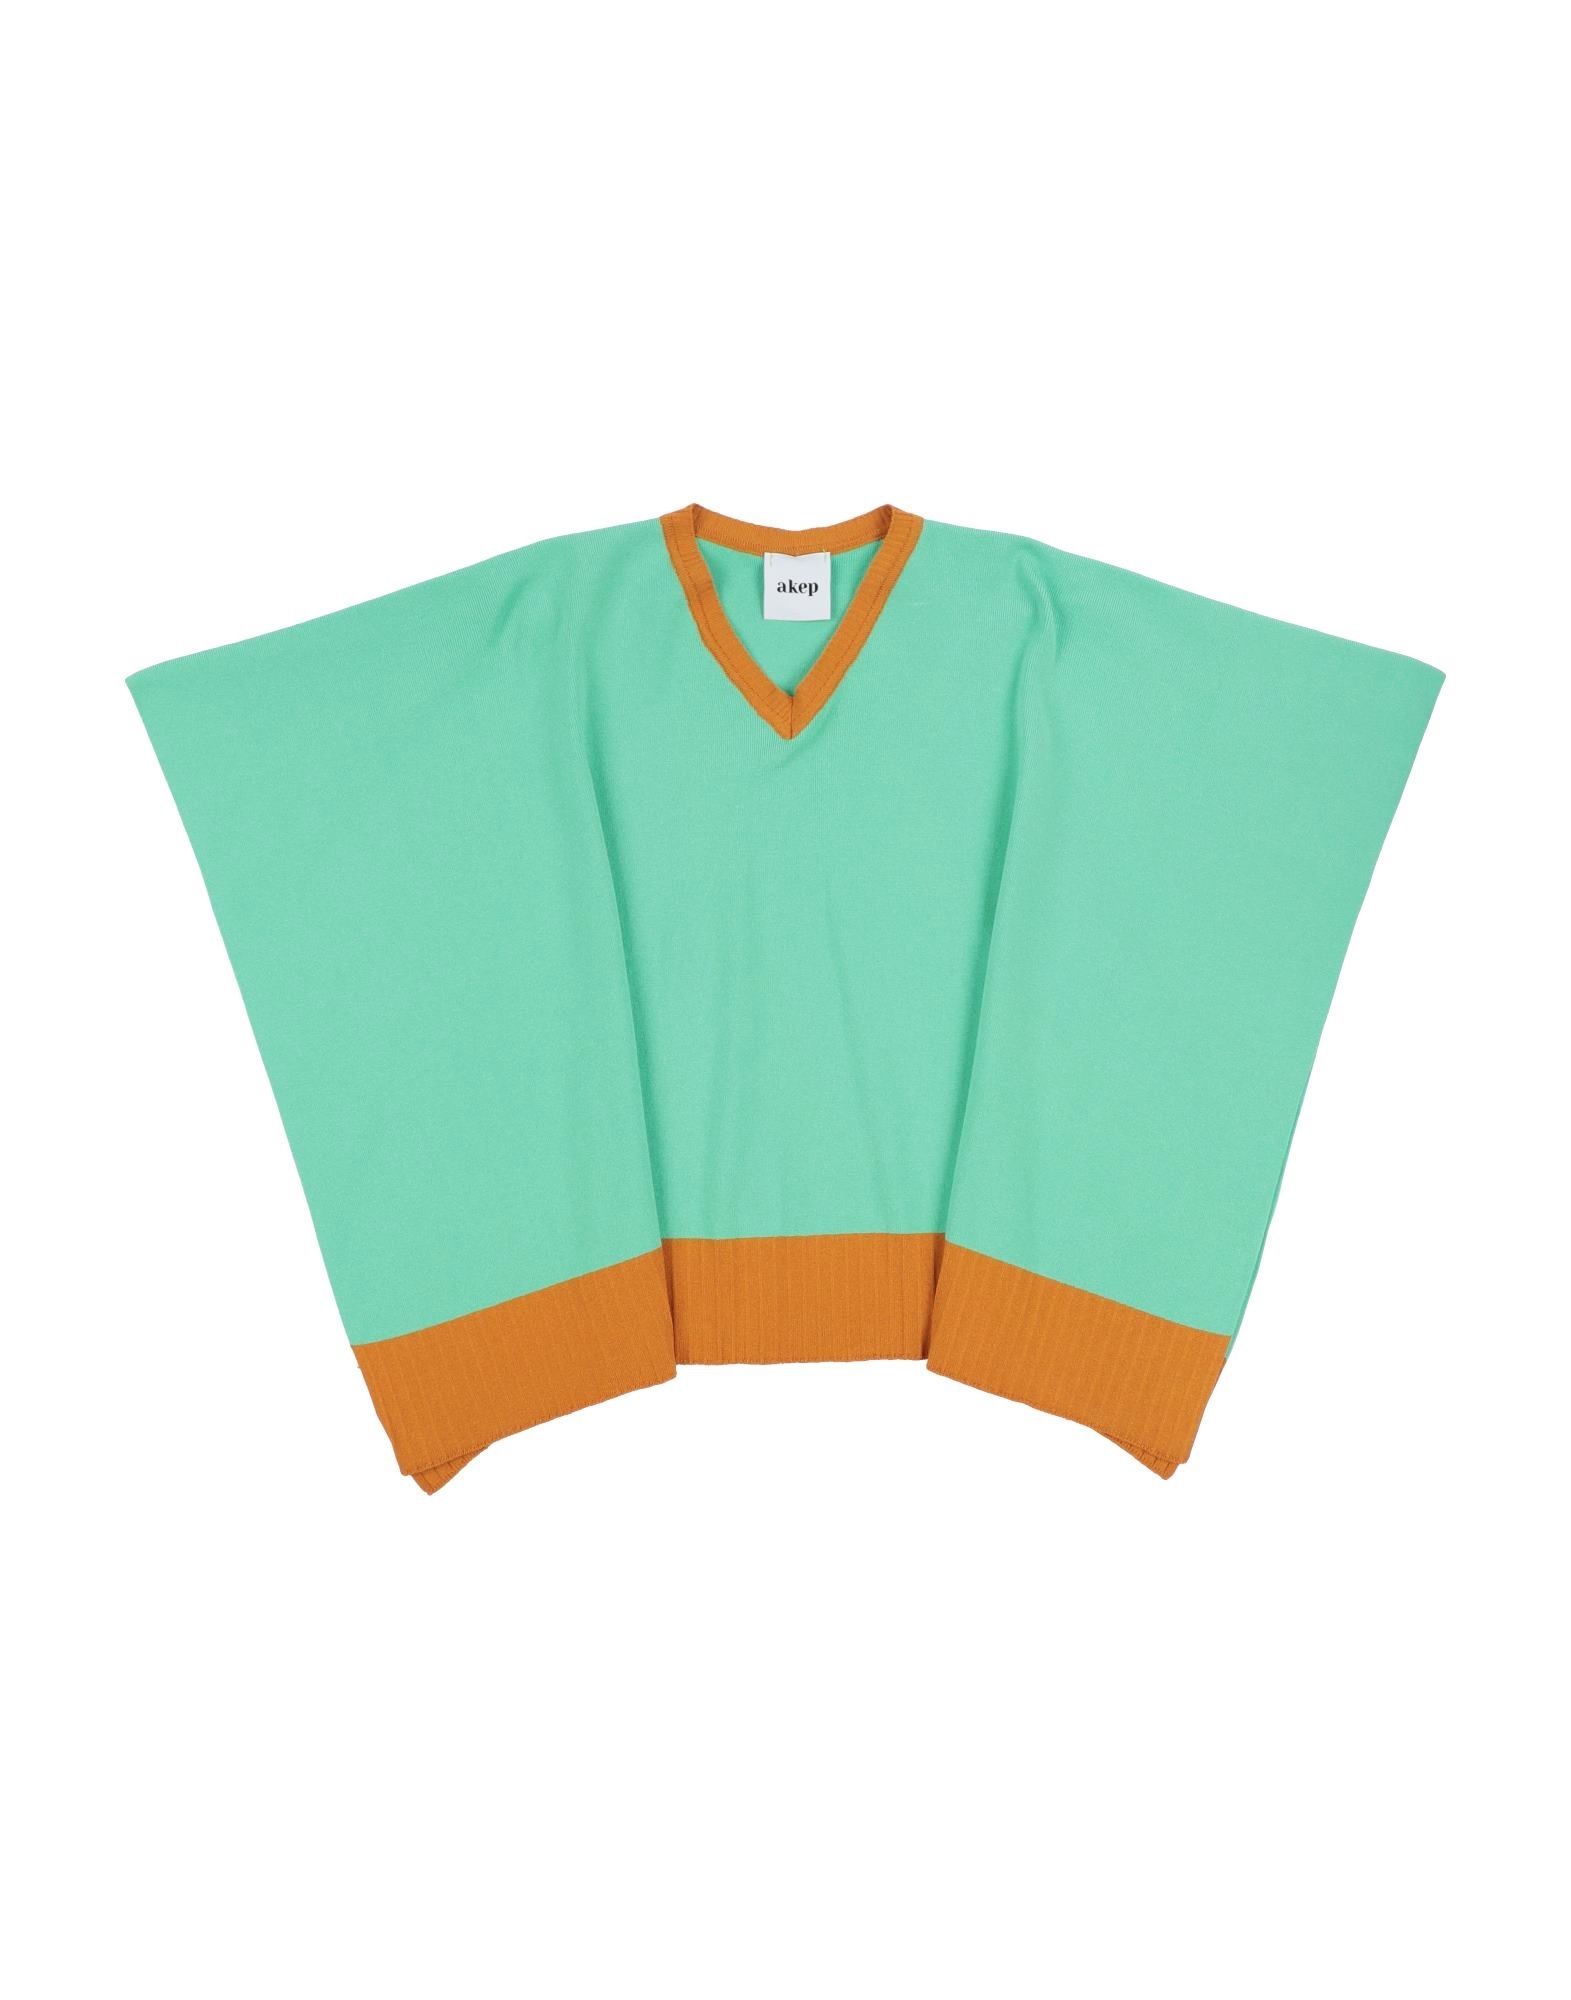 Akep Kids' Sweaters In Light Green